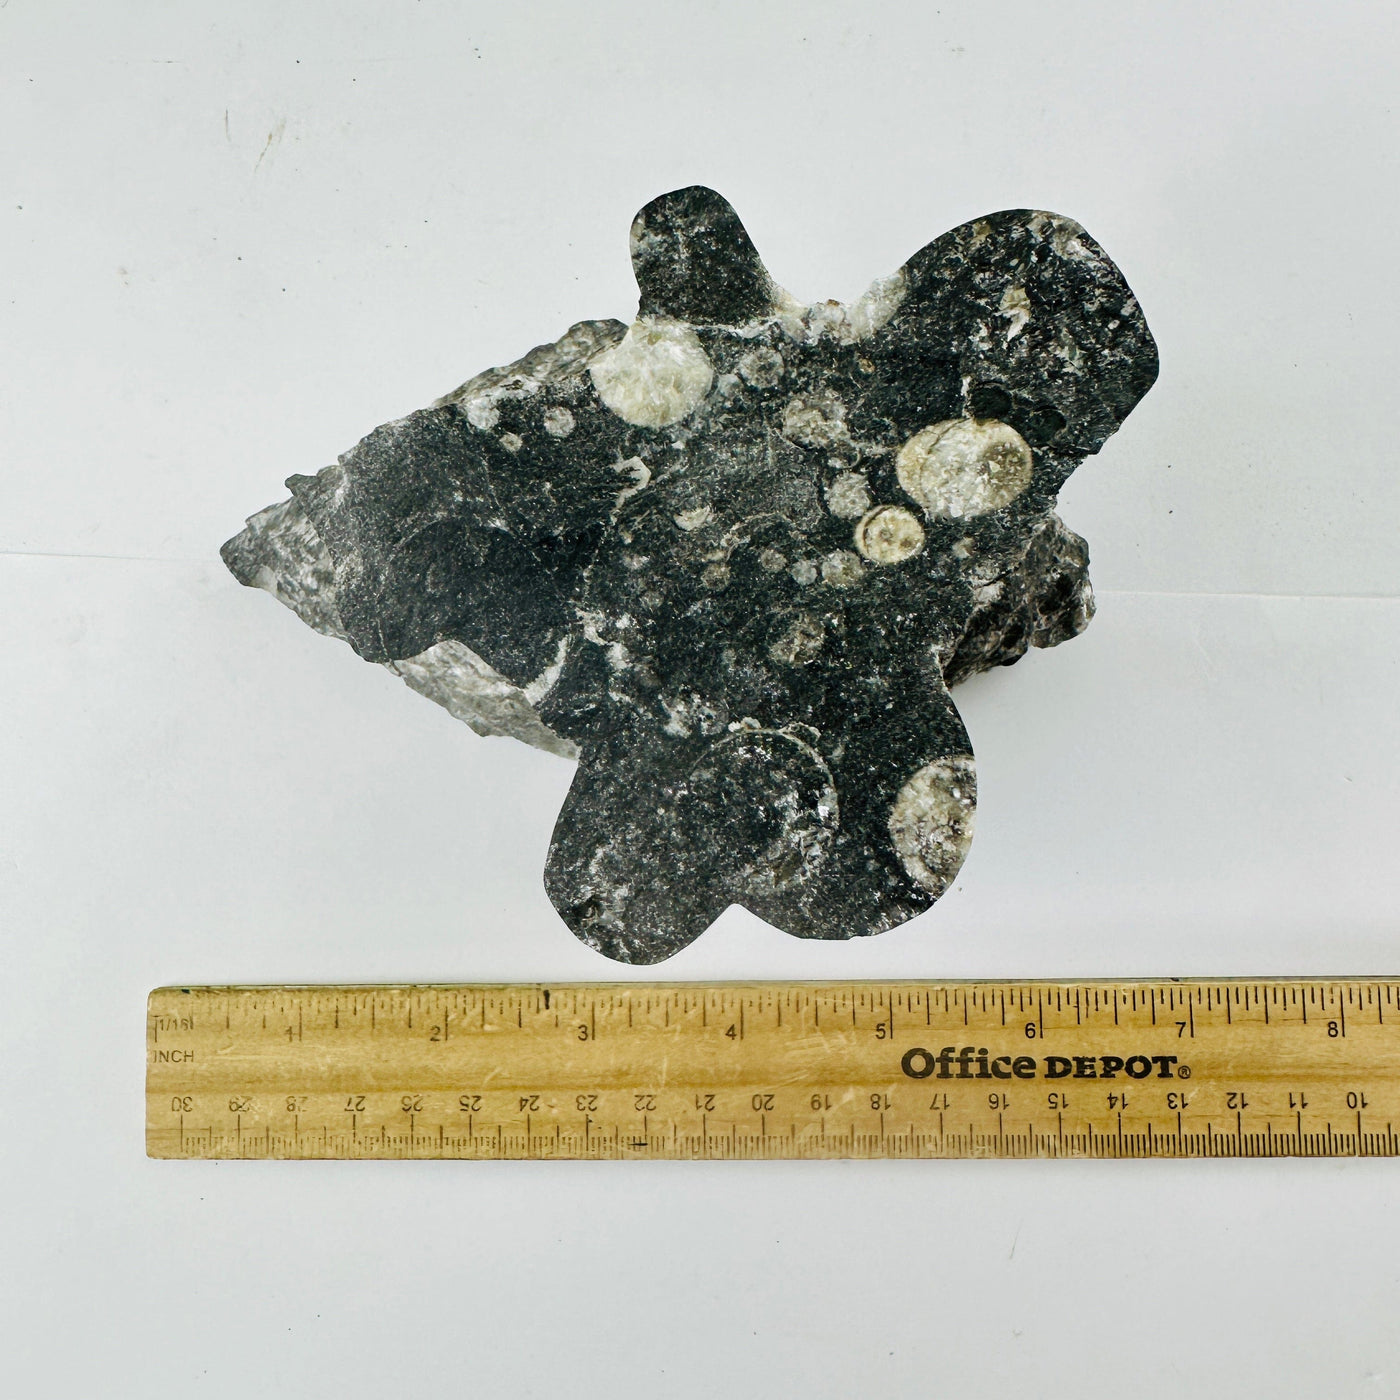 Orthoceras Fossil AS IS top view with ruler for size reference